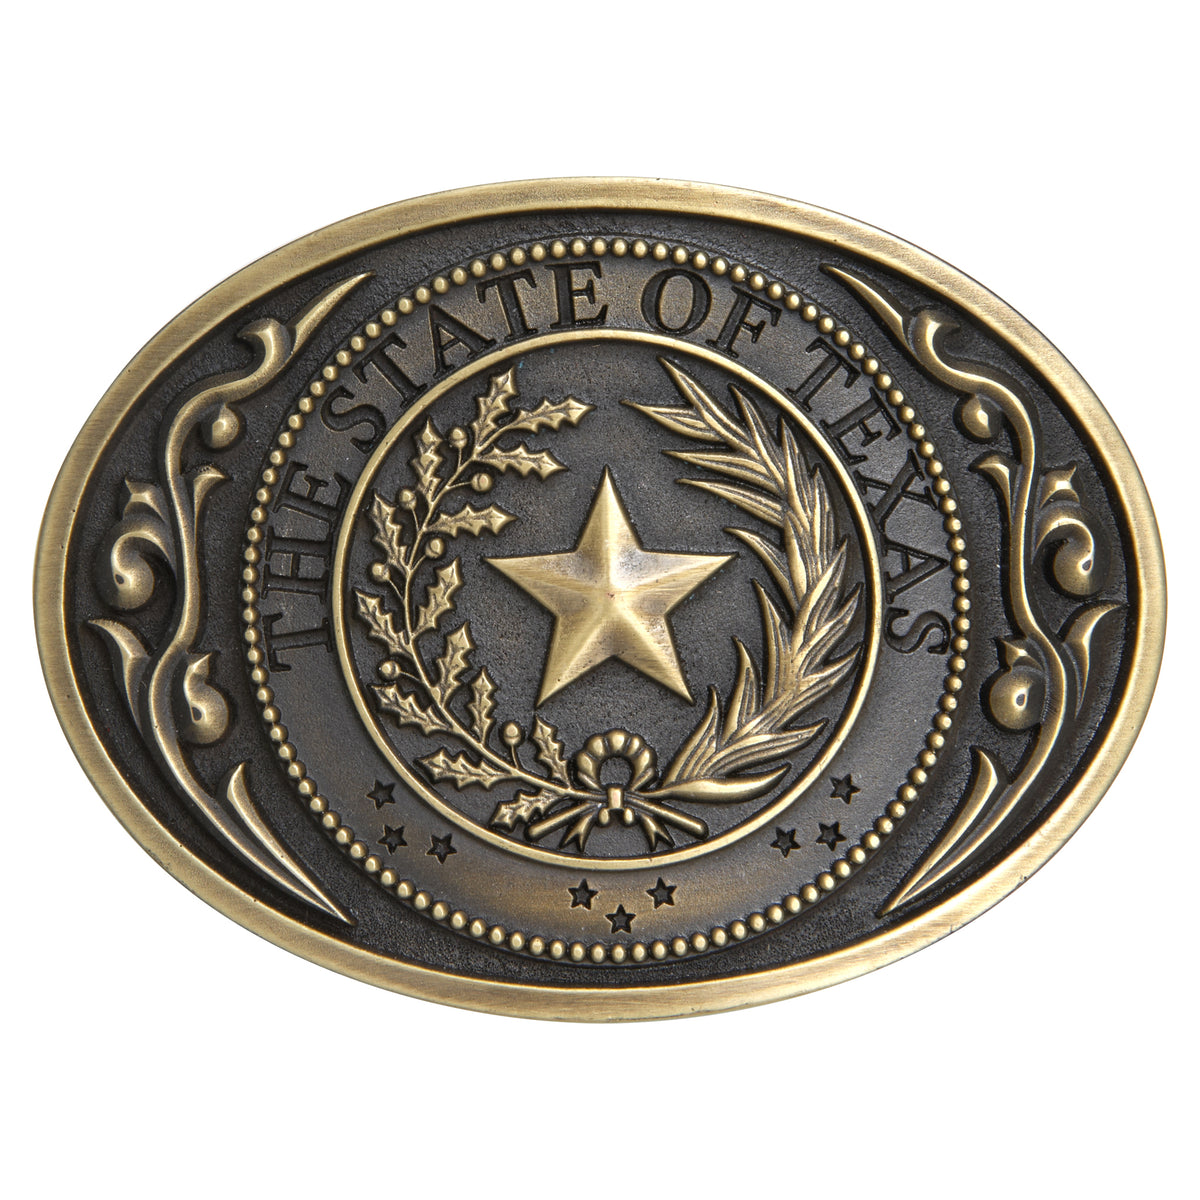 The State of Texas Seal Buckle